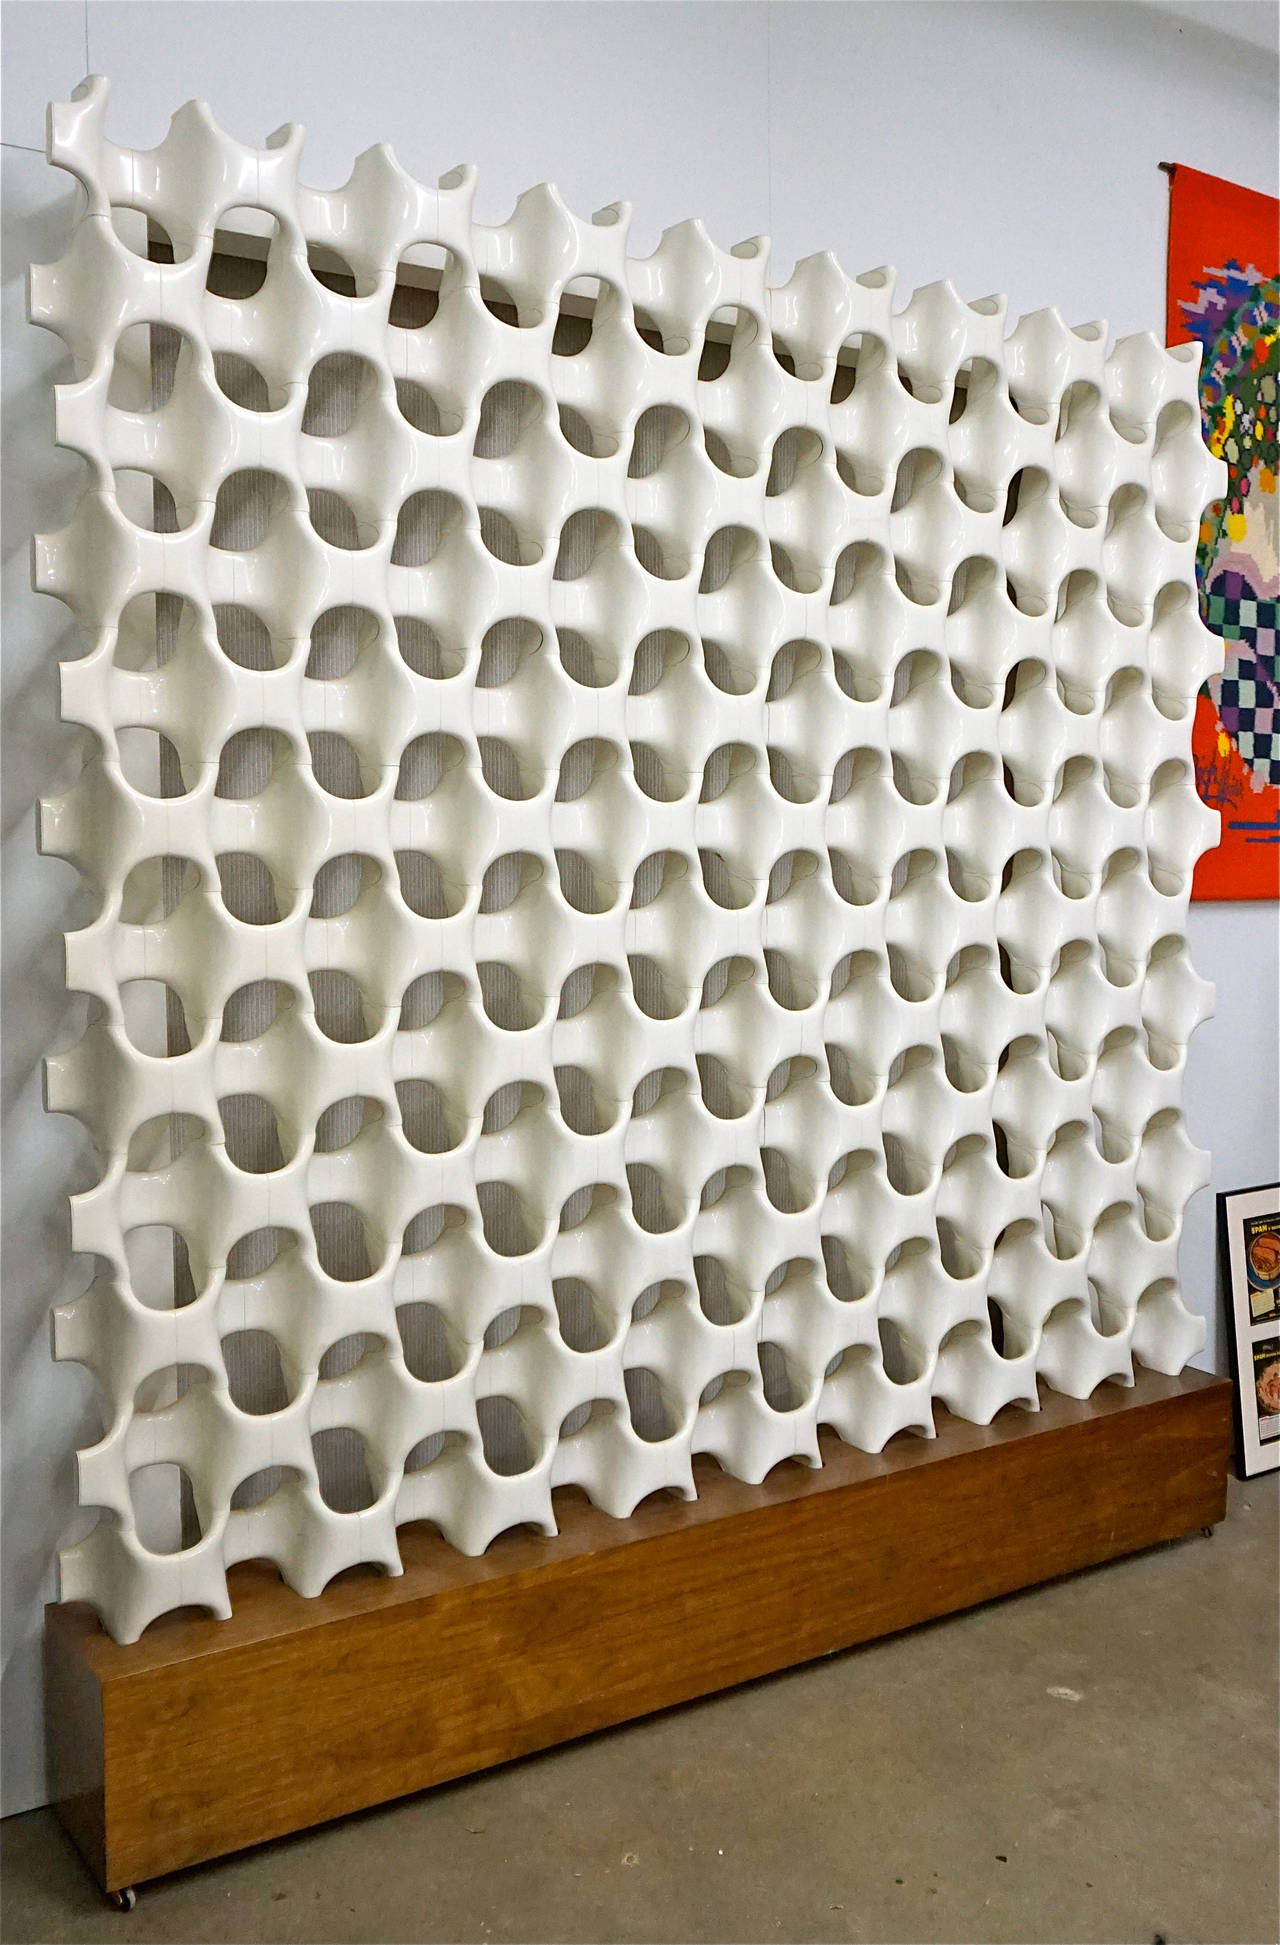 A freestanding sculptural room divider or screen by Don Harvey, from his 